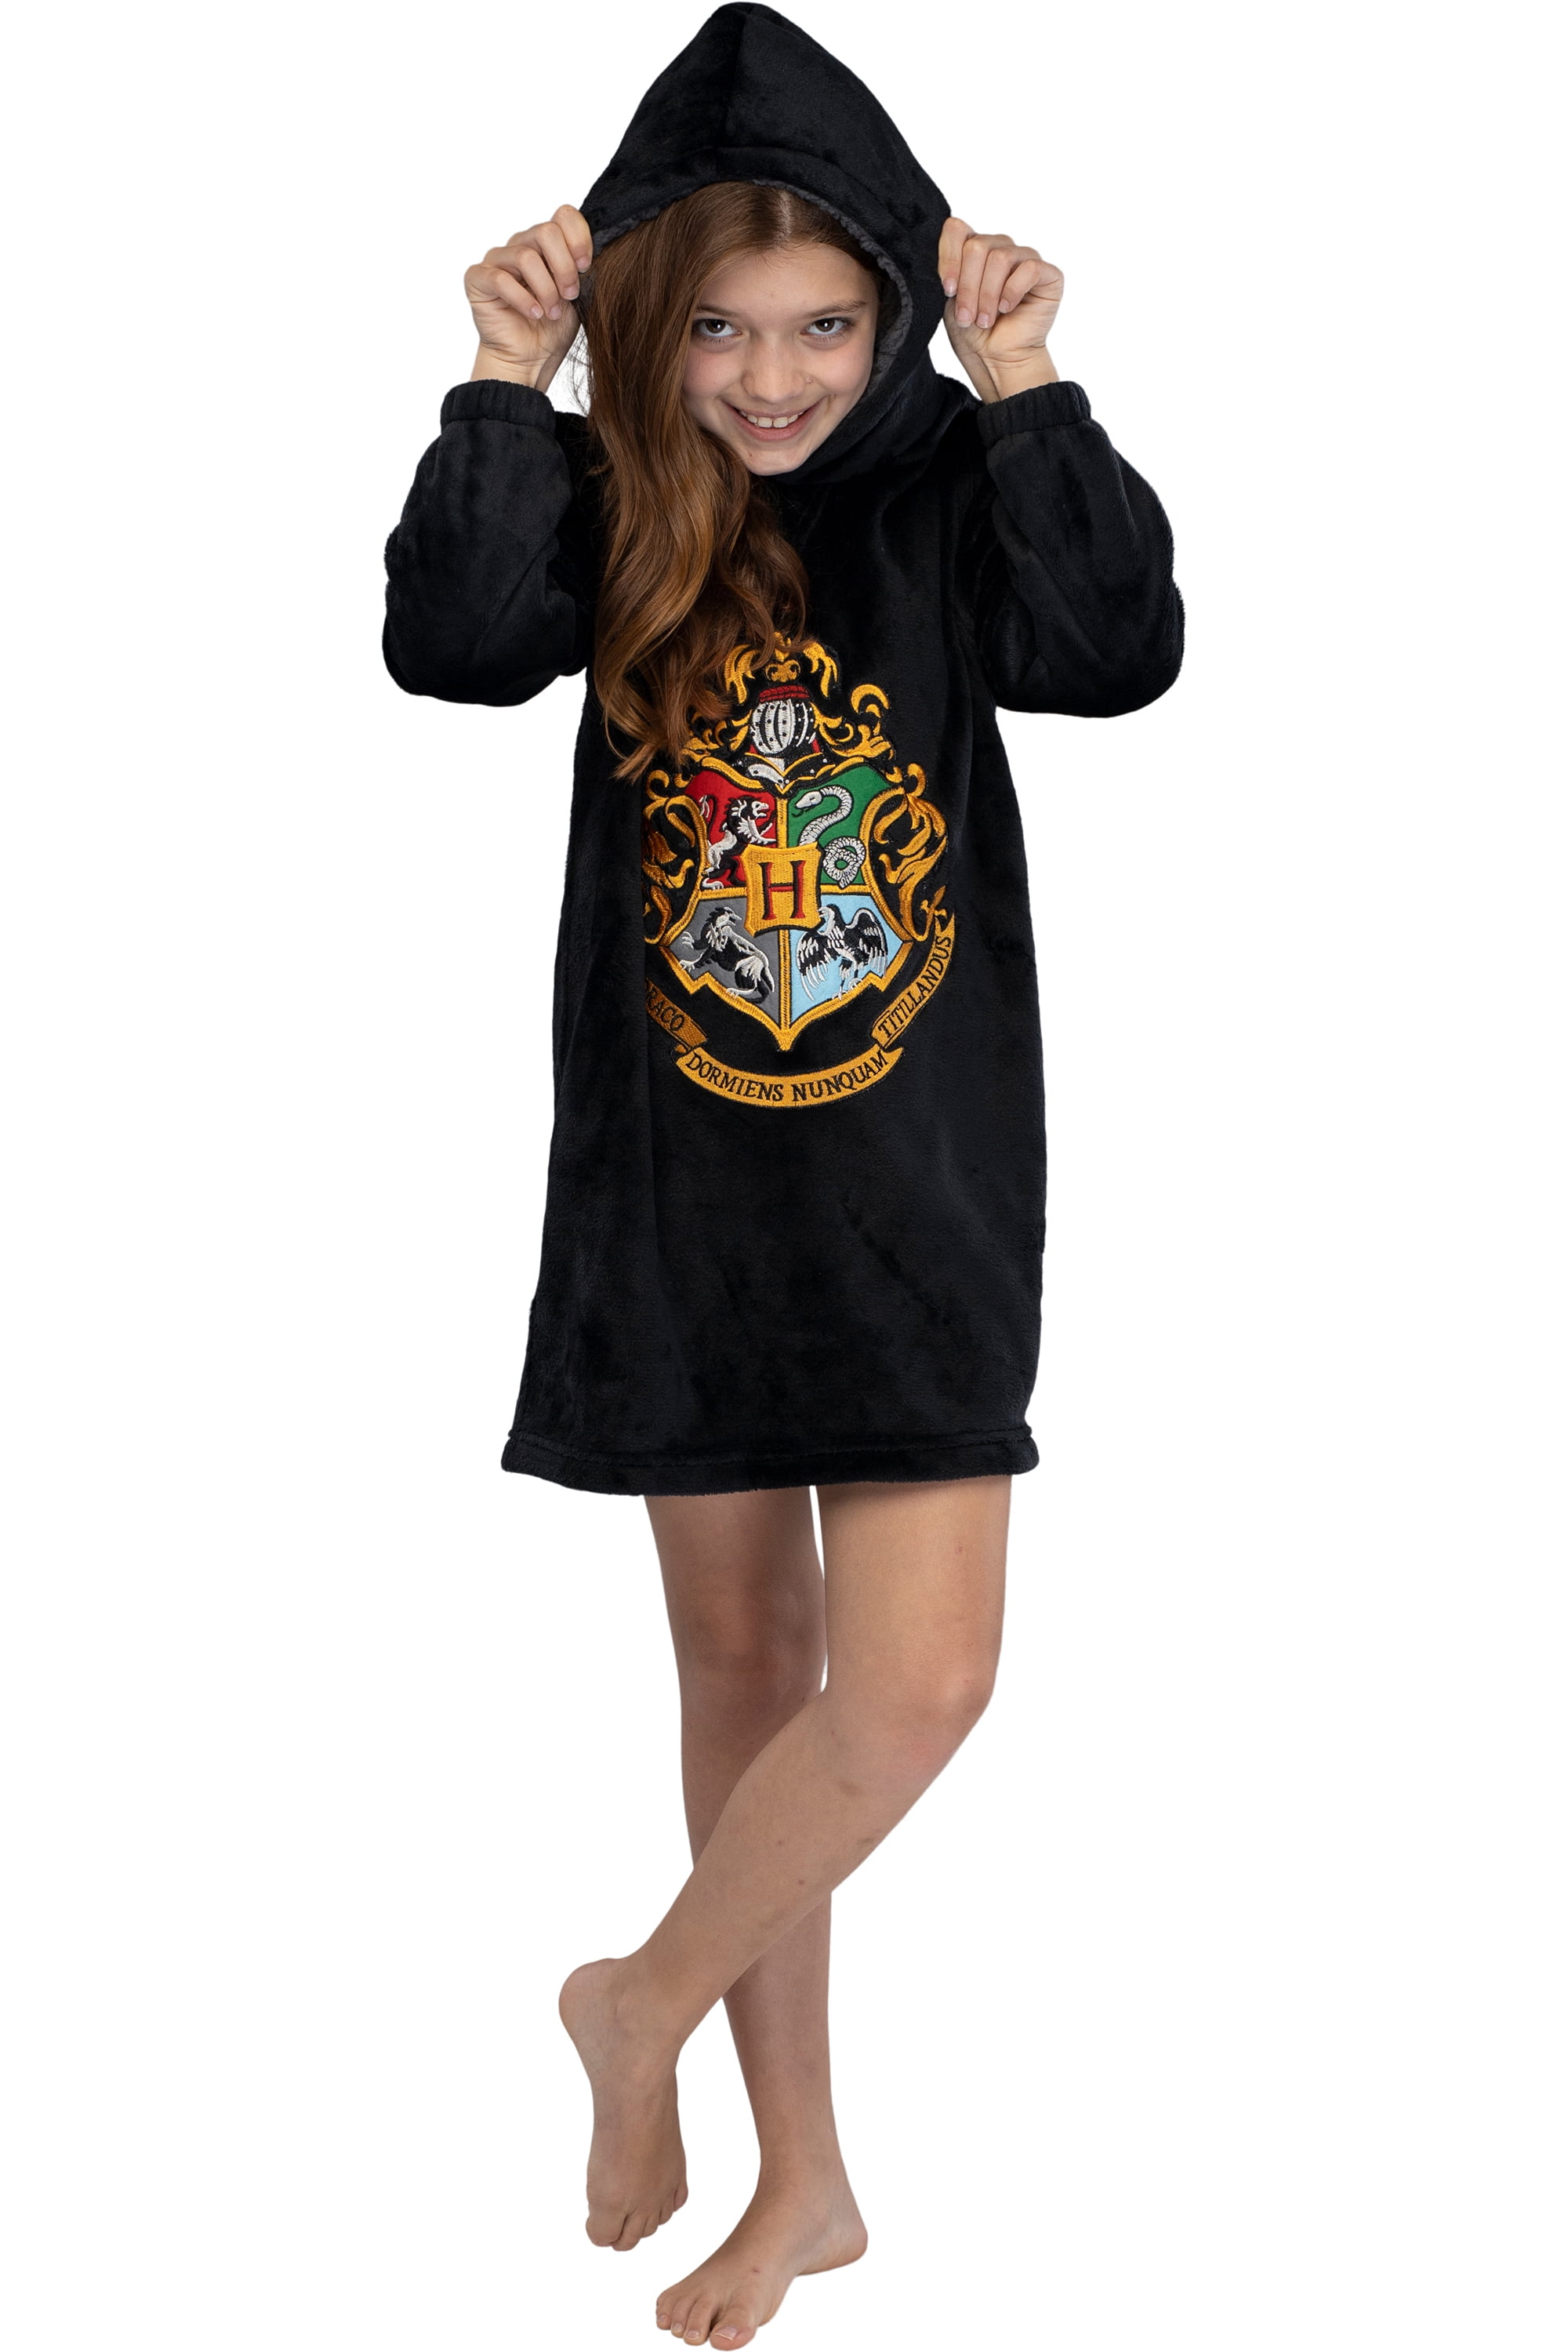 Harry Potter Hoodies Black Hoodie for Girls and Teens Official Merchandise 